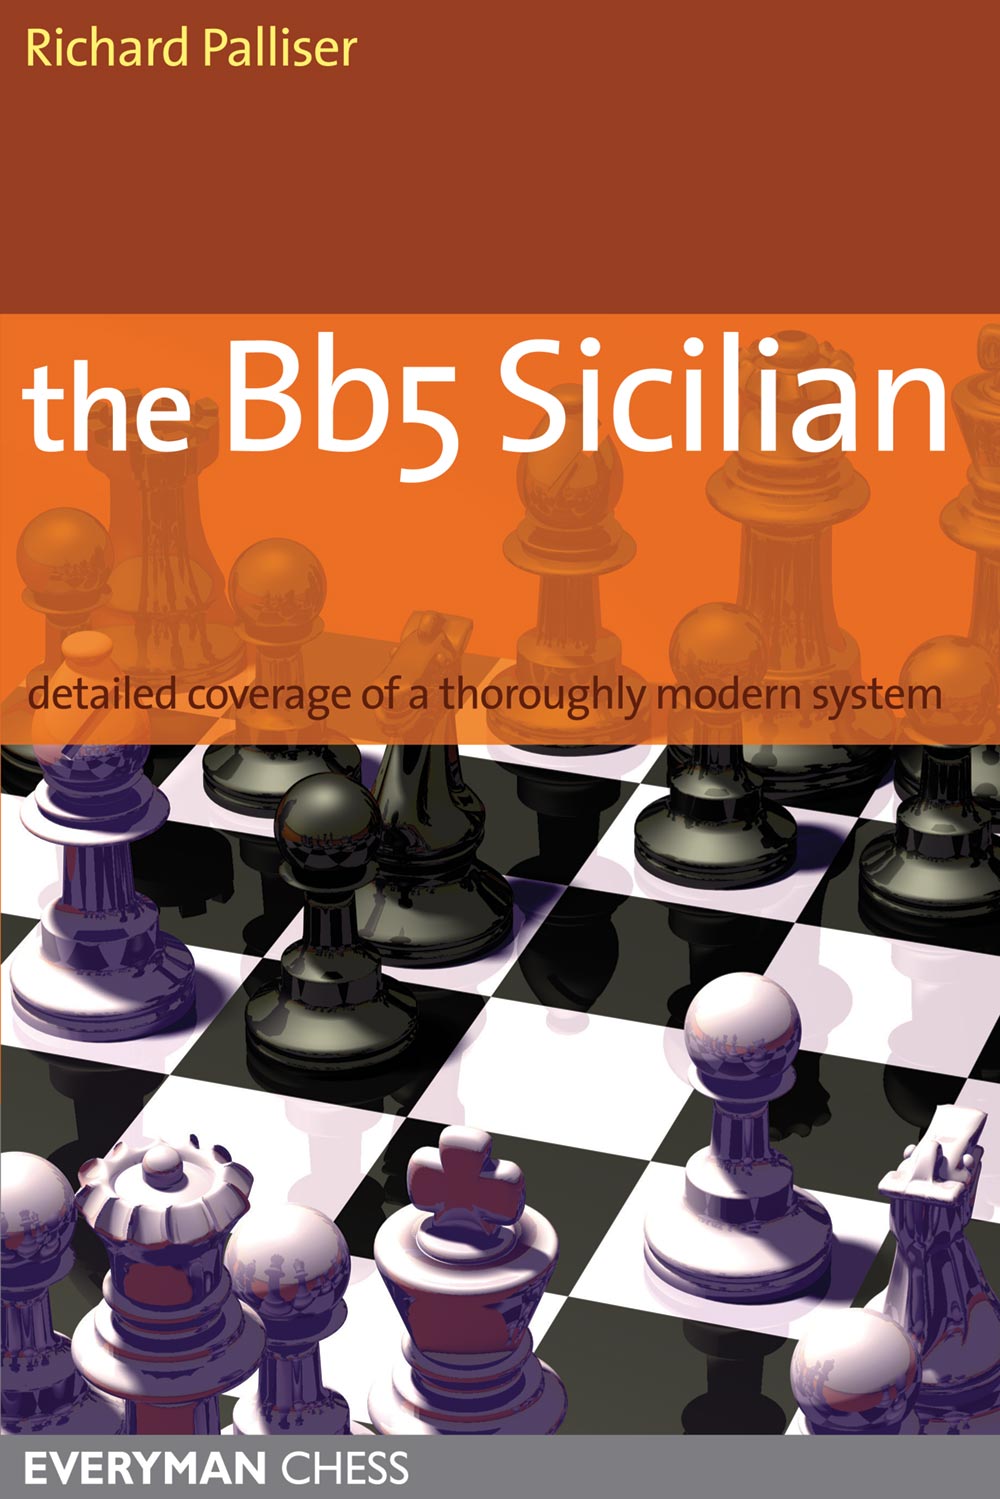 The Bb5 Sicilian: Detailed coverage of a thoroughly modern system